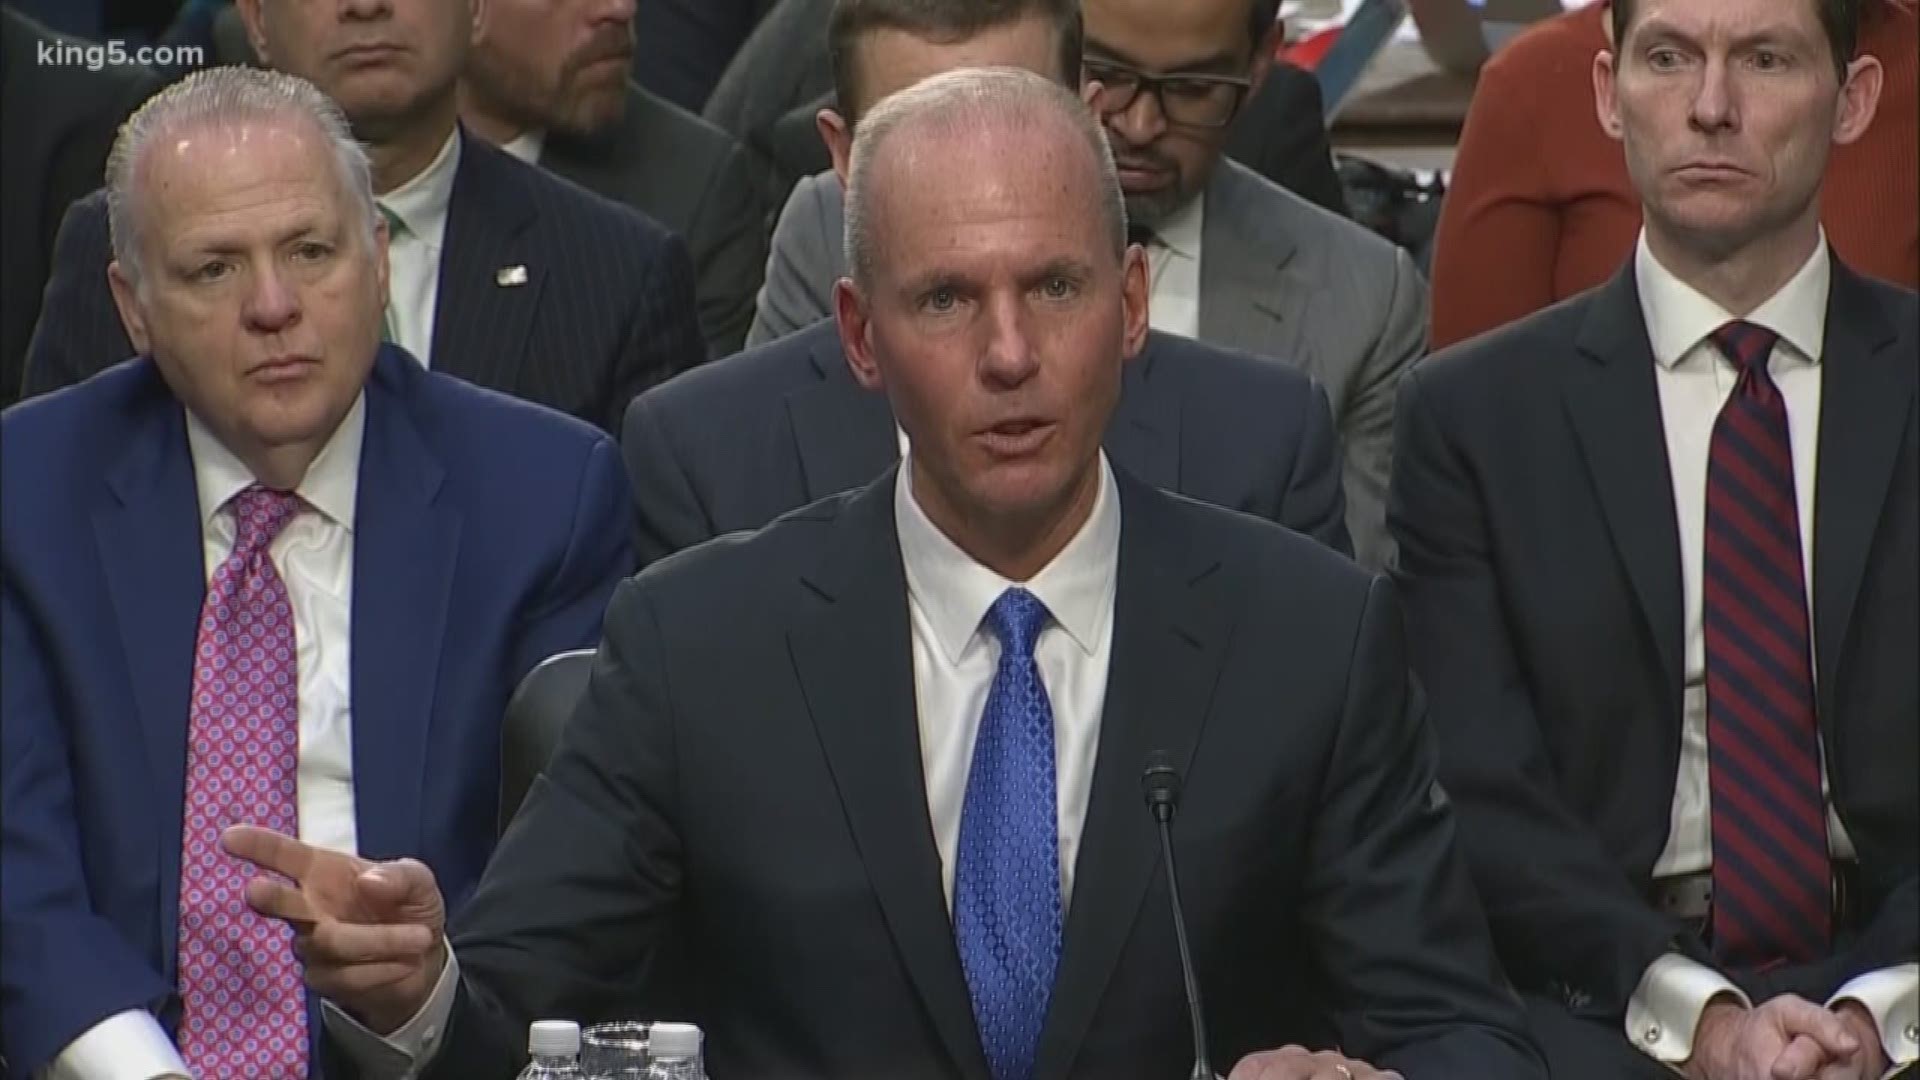 Senators grilled Boeing CEO Dennis Muilenburg about safety regulations and the "cozy relationship" his company has with the FAA.